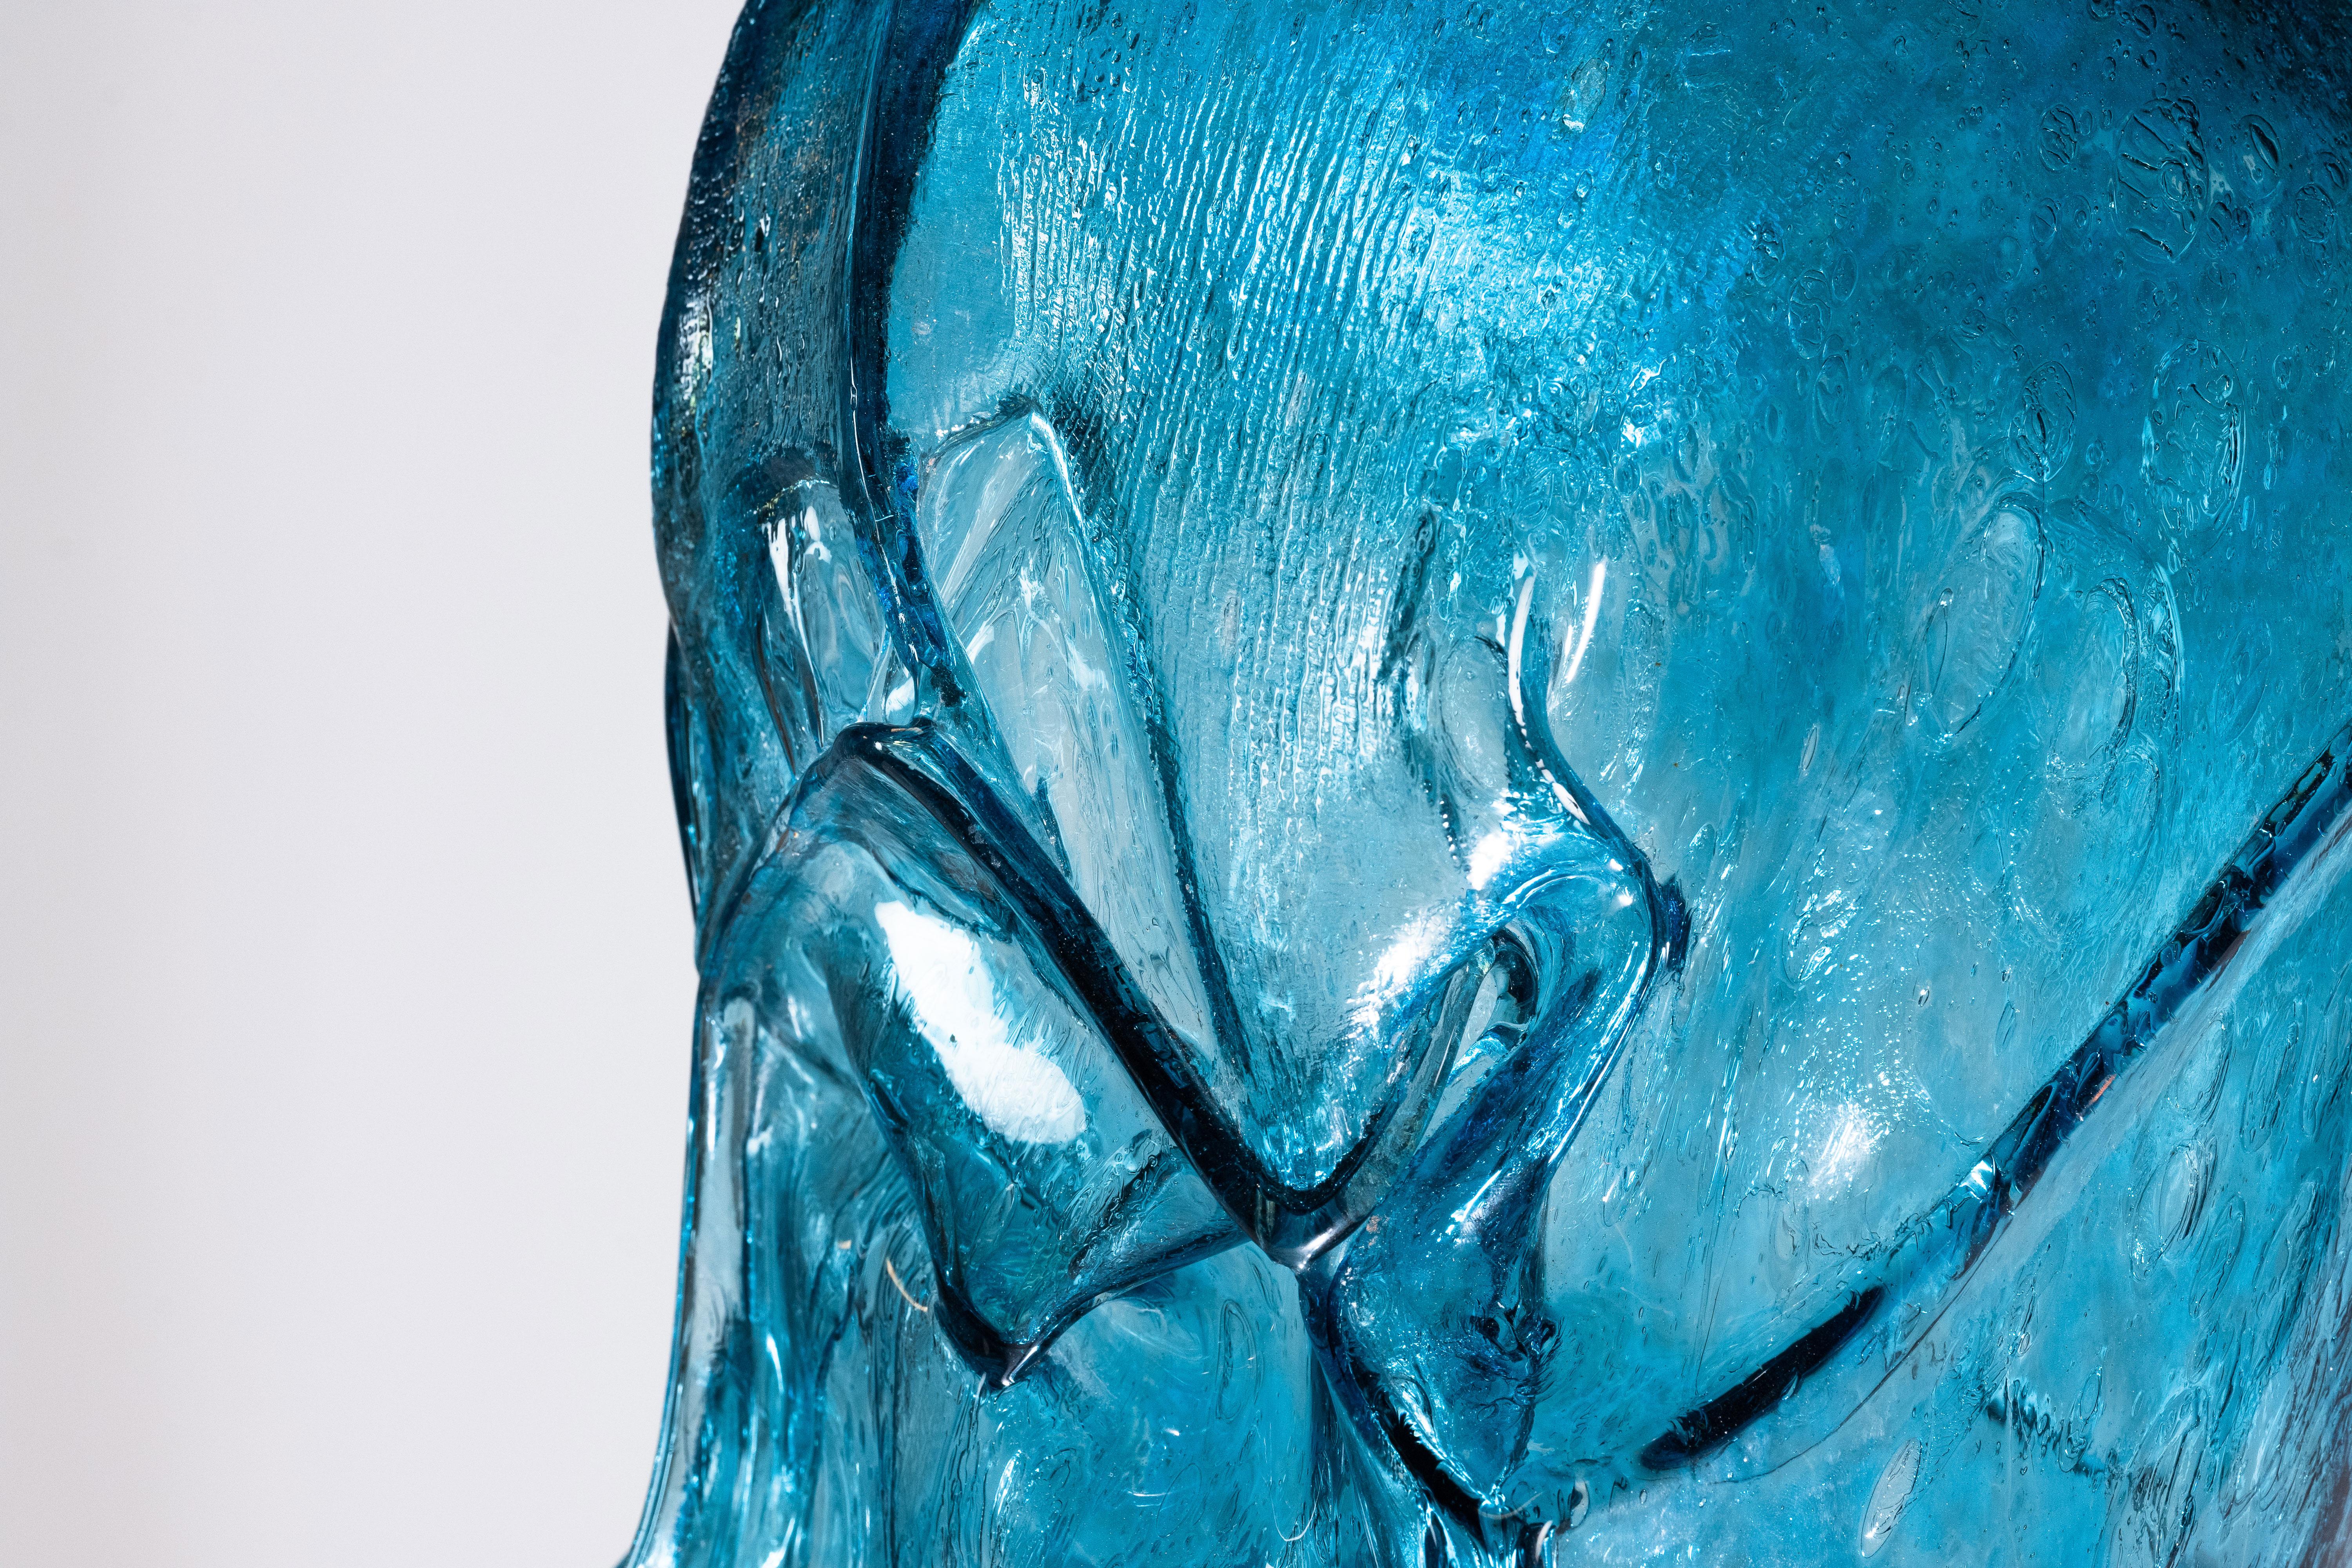 Twentieth Exhibitions is proud to present the début of Hydrochrom, a family of glass sculptures by LA-based artist and designer Sébastien Léon. Hydrochrom, stemming from the Greek expression for “The color of water” consists of tabletop sculptures,